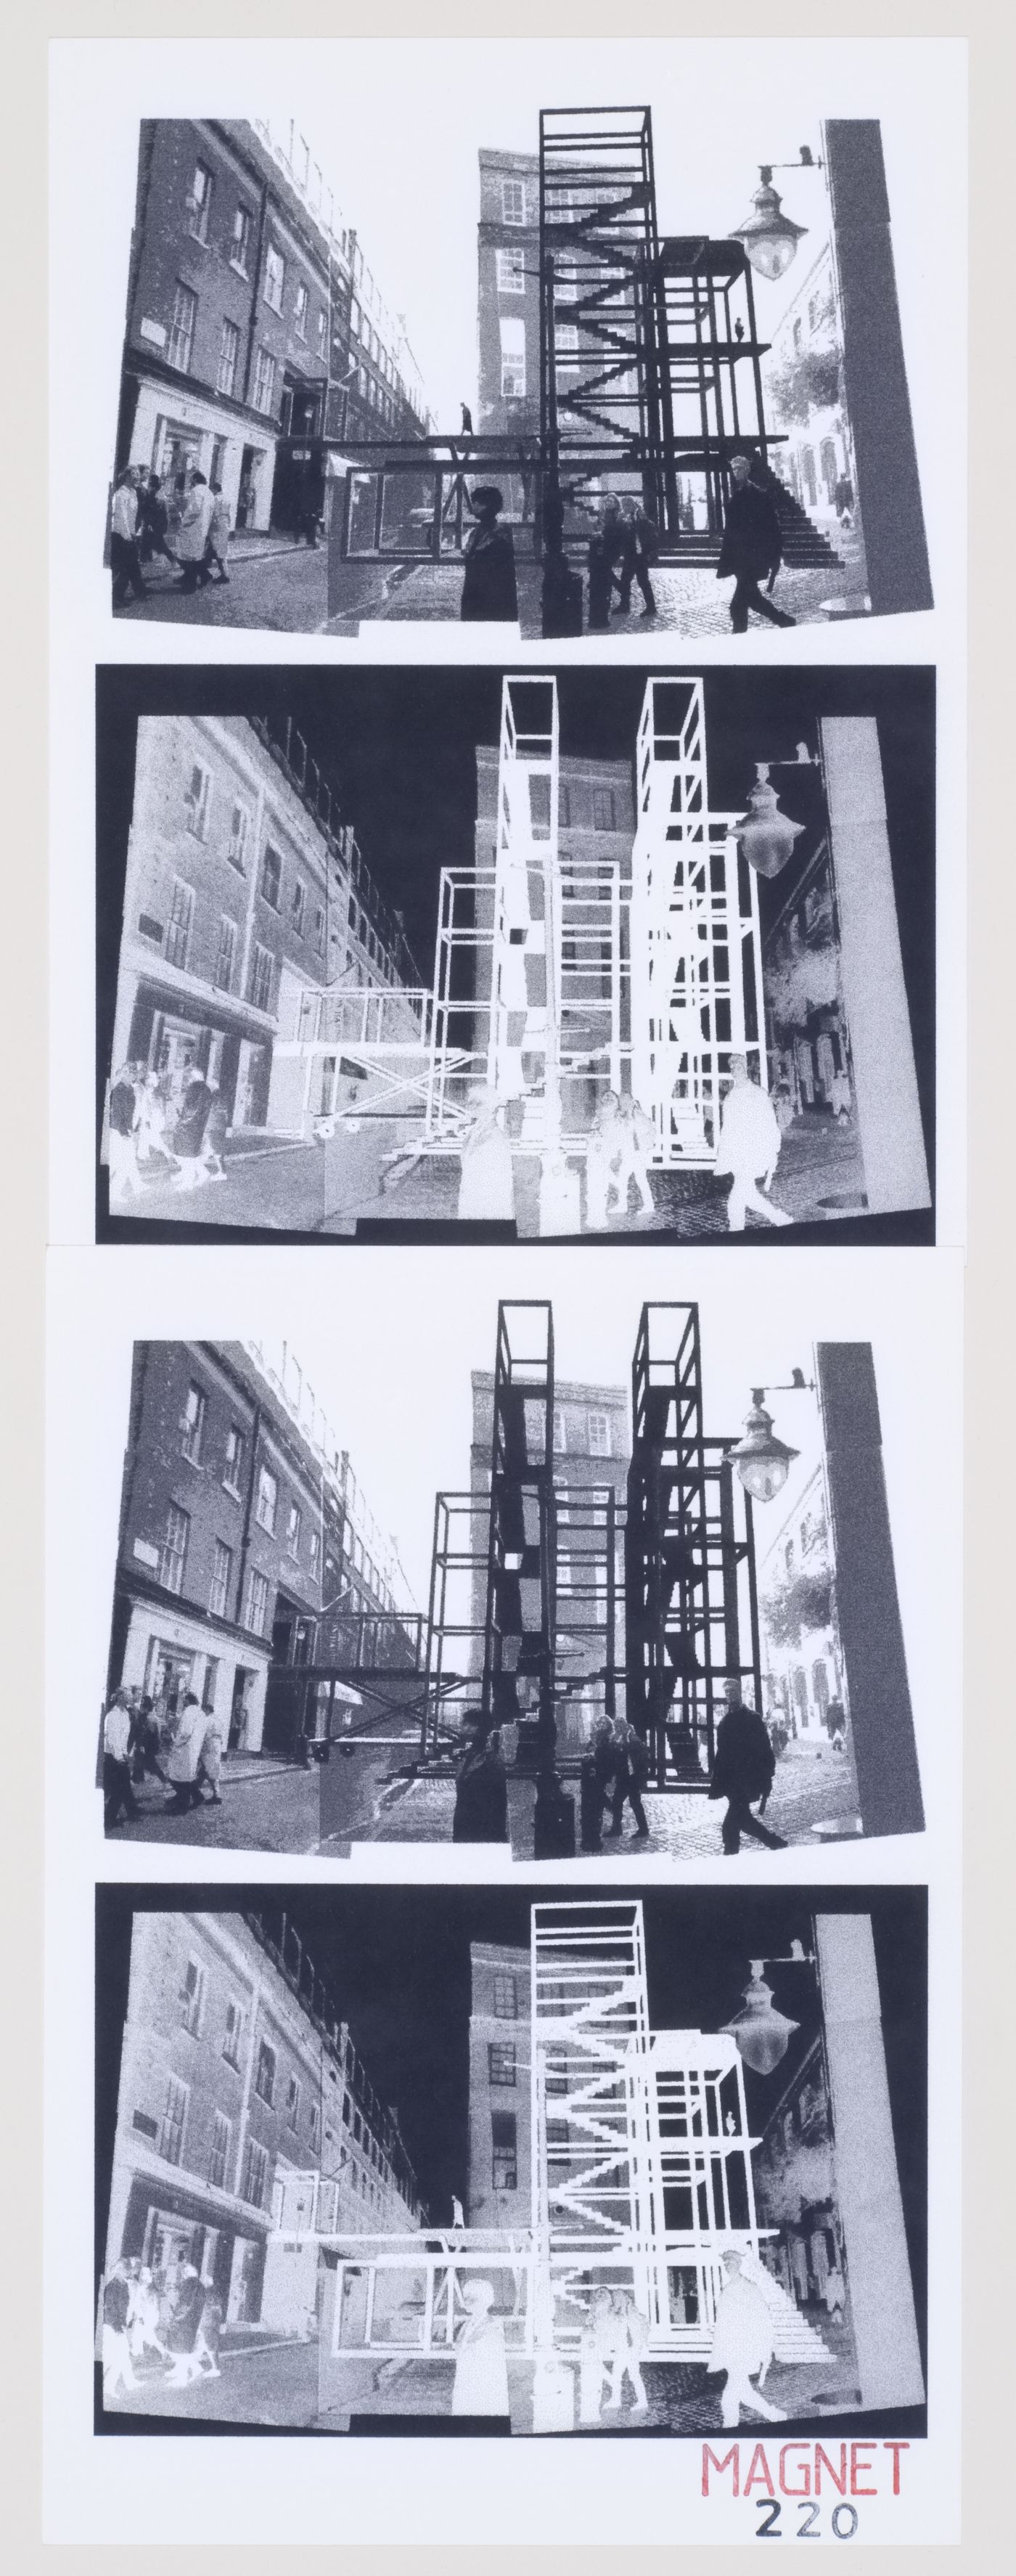 Photomontages of Magnet no. 1 (Stairways at Covent Garden, Neal Street, London, England)